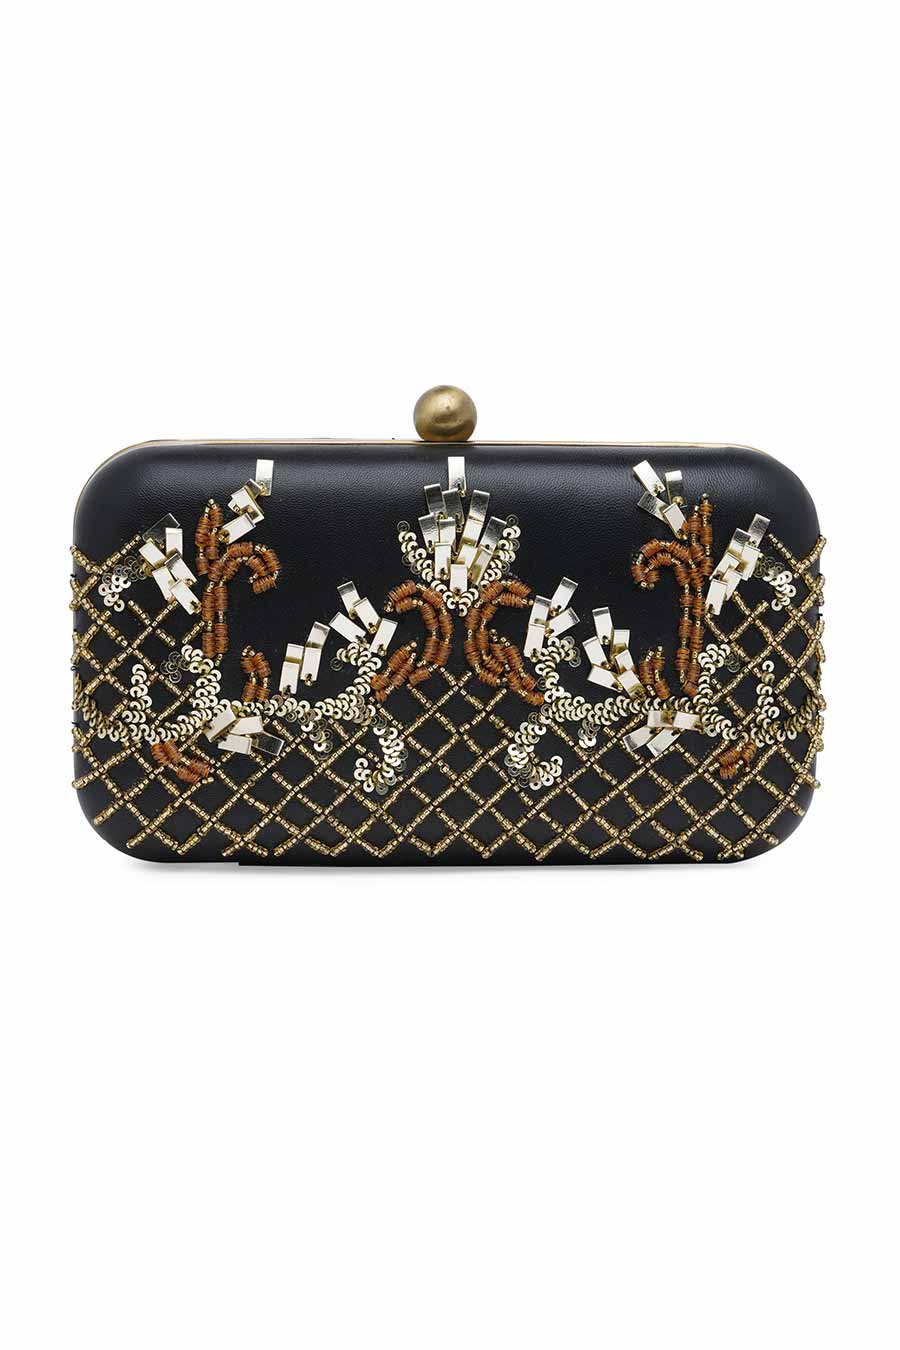 Black & Gold Embroidered Leather Clutch